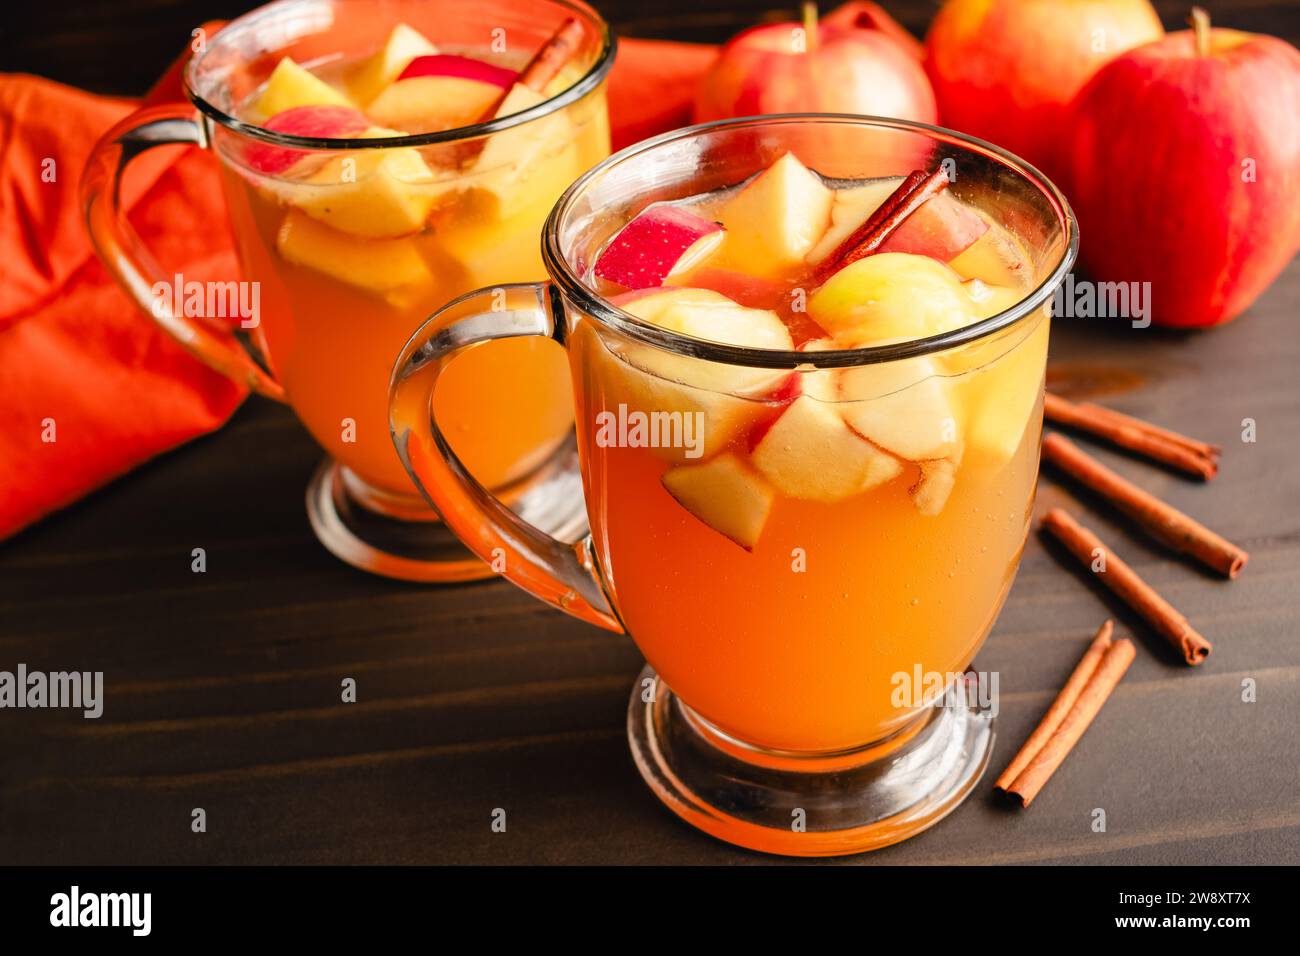 Fall Sangria Made with White Wine, Apples, Pears, and Cinnamon: Autumn sangria flavored with chunks of fruit, bourbon whiskey, and maple syrup Stock Photo